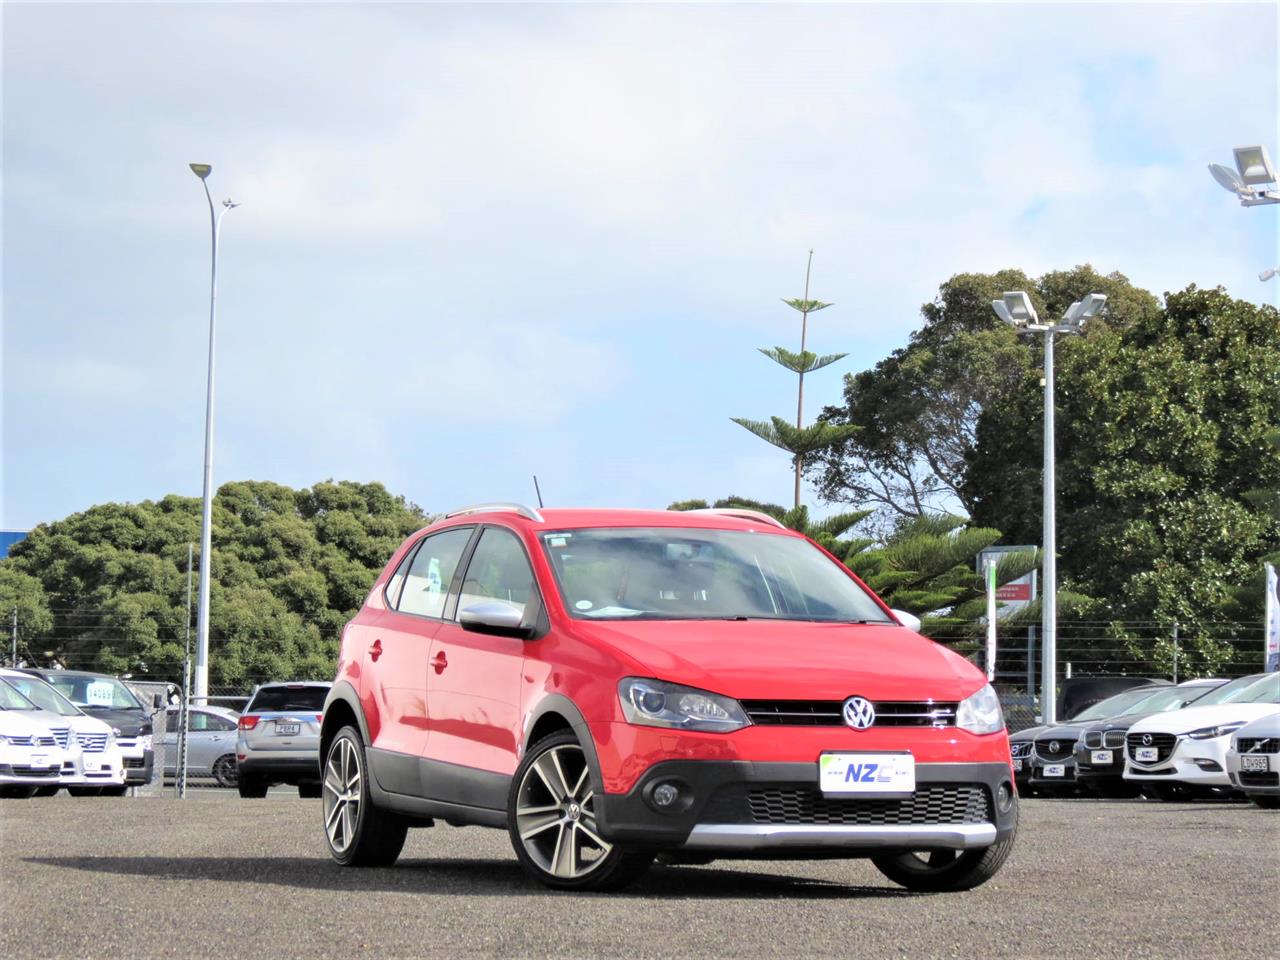 NZC 2012 Volkswagen Cross Polo just arrived to Auckland